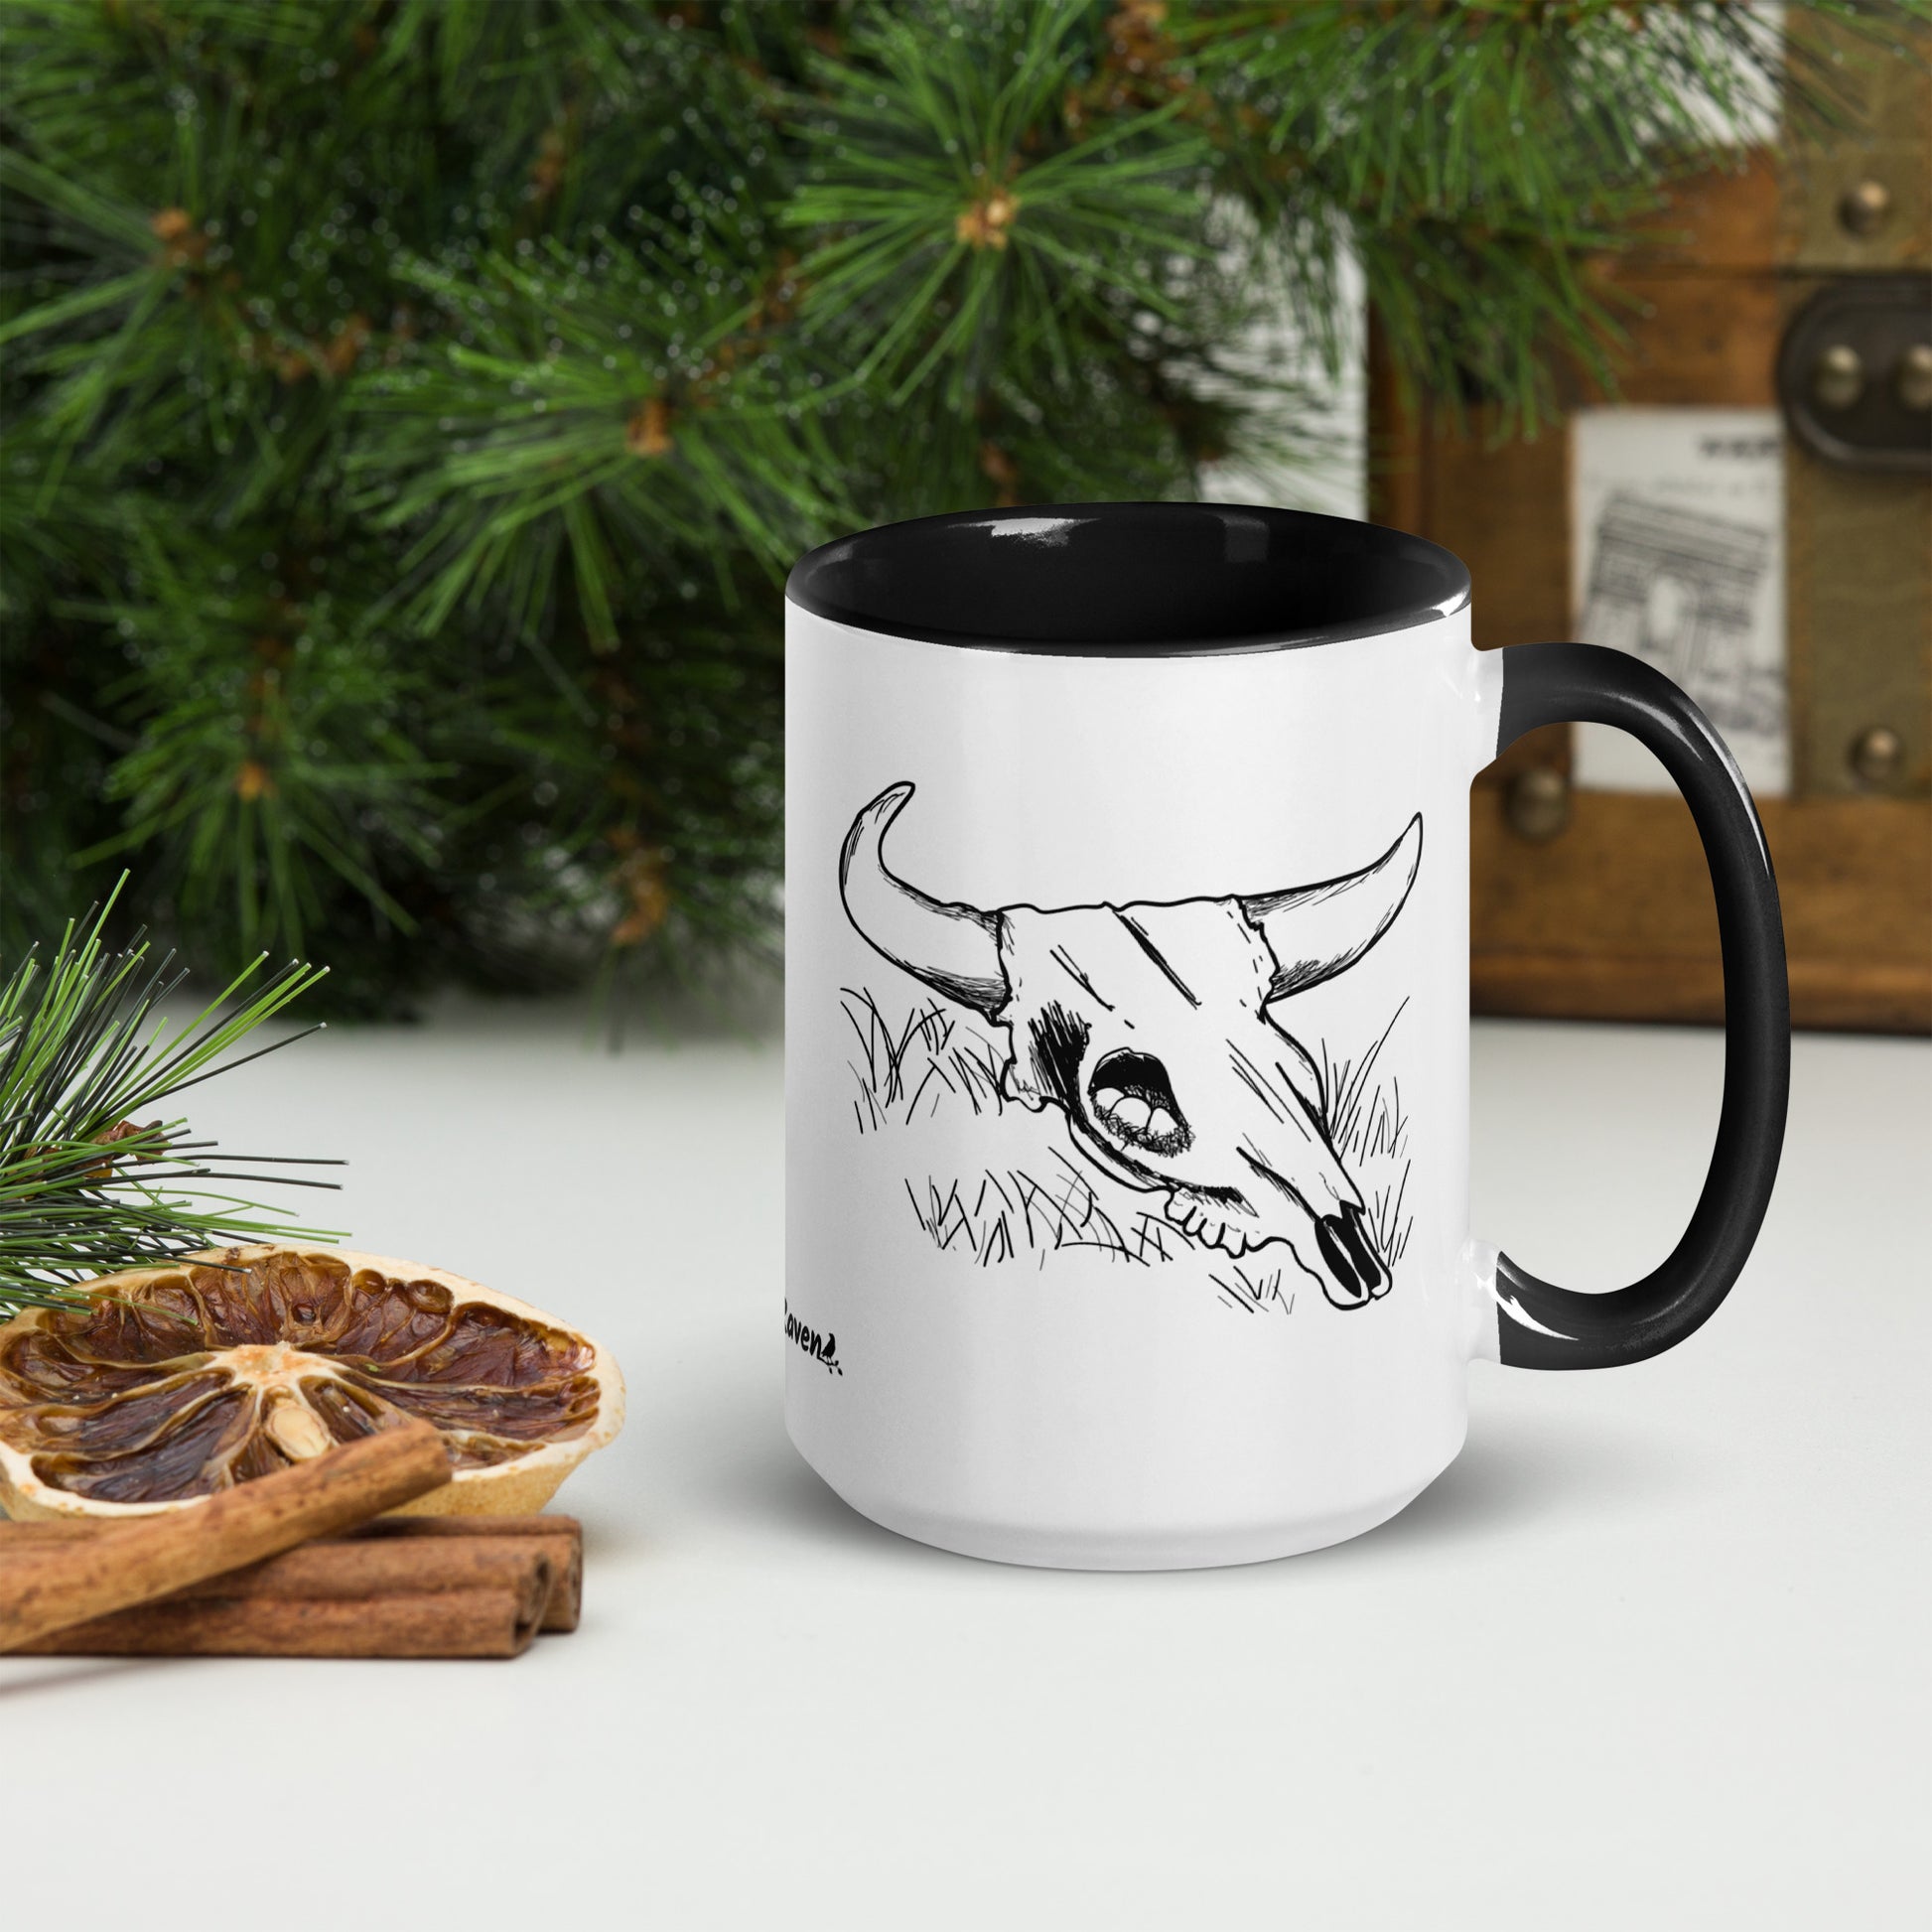 15 ounce ceramic mug. White with black handle and inside. Features double sided image of a cow skull cradling a bird nest. Shown by dried citrus slices and pine boughs.